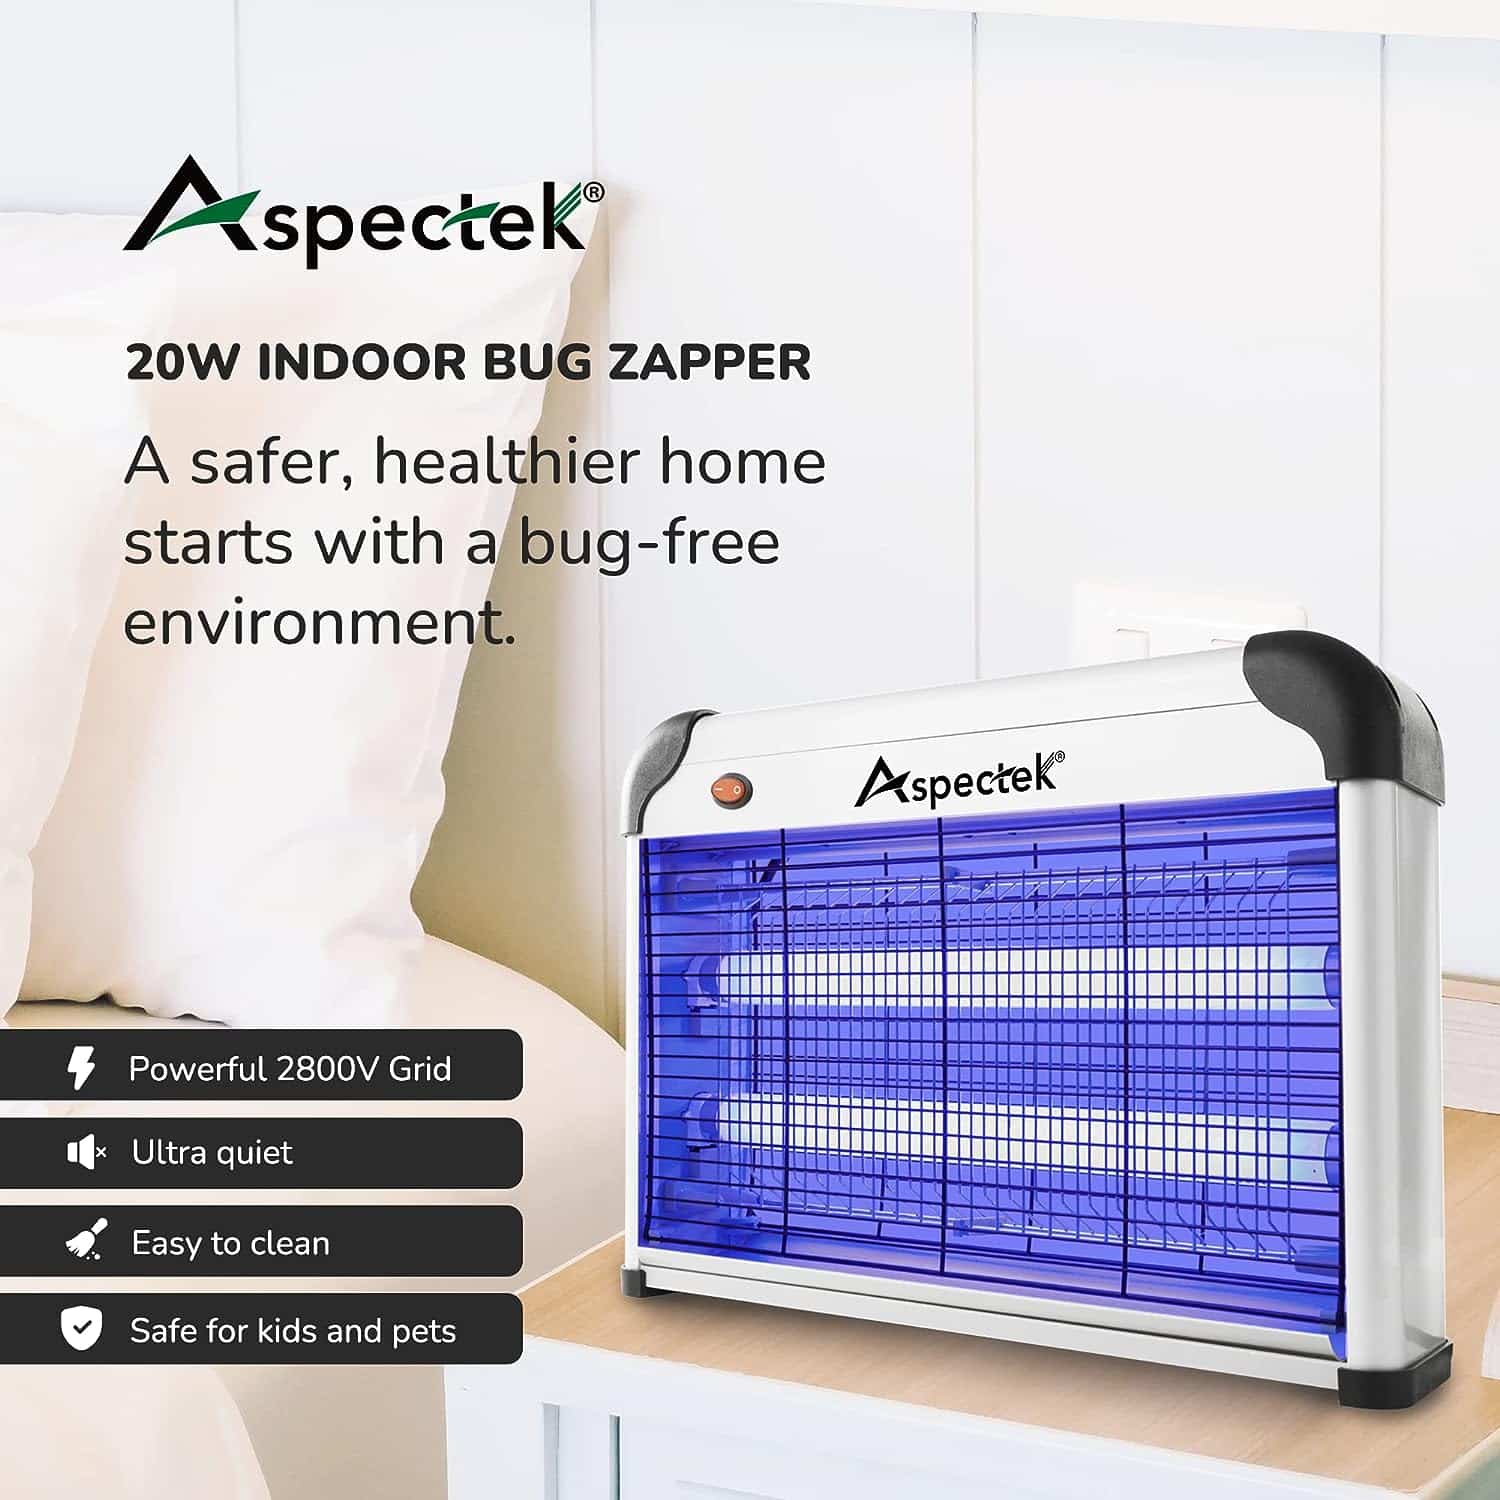 ASPECTEK Powerful 20W Electronic Insect Indoor Zapper Review: The Ultimate Bug Zapper for Uninterrupted Satisfaction